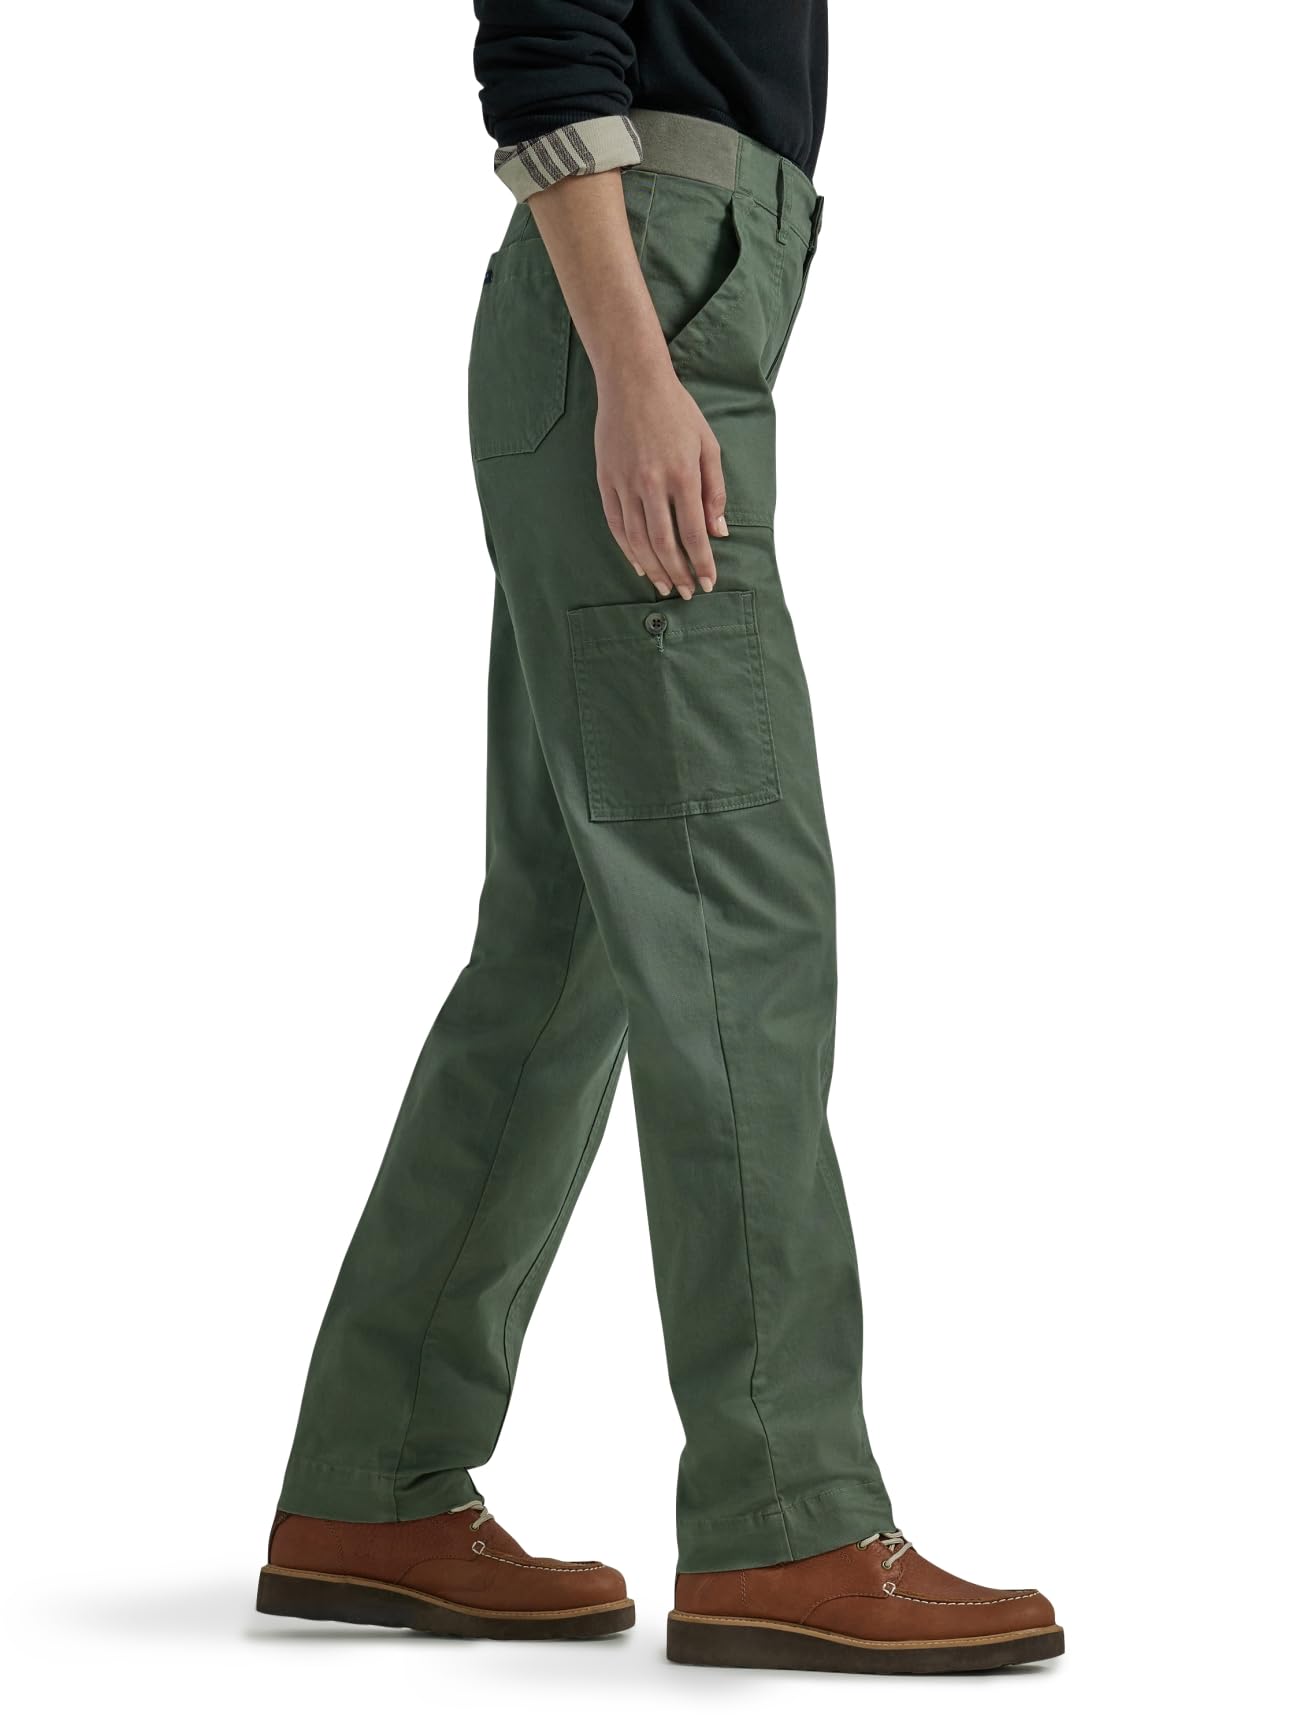 Lee Women's Ultra Lux Comfort with Flex-to-go Utility Pant